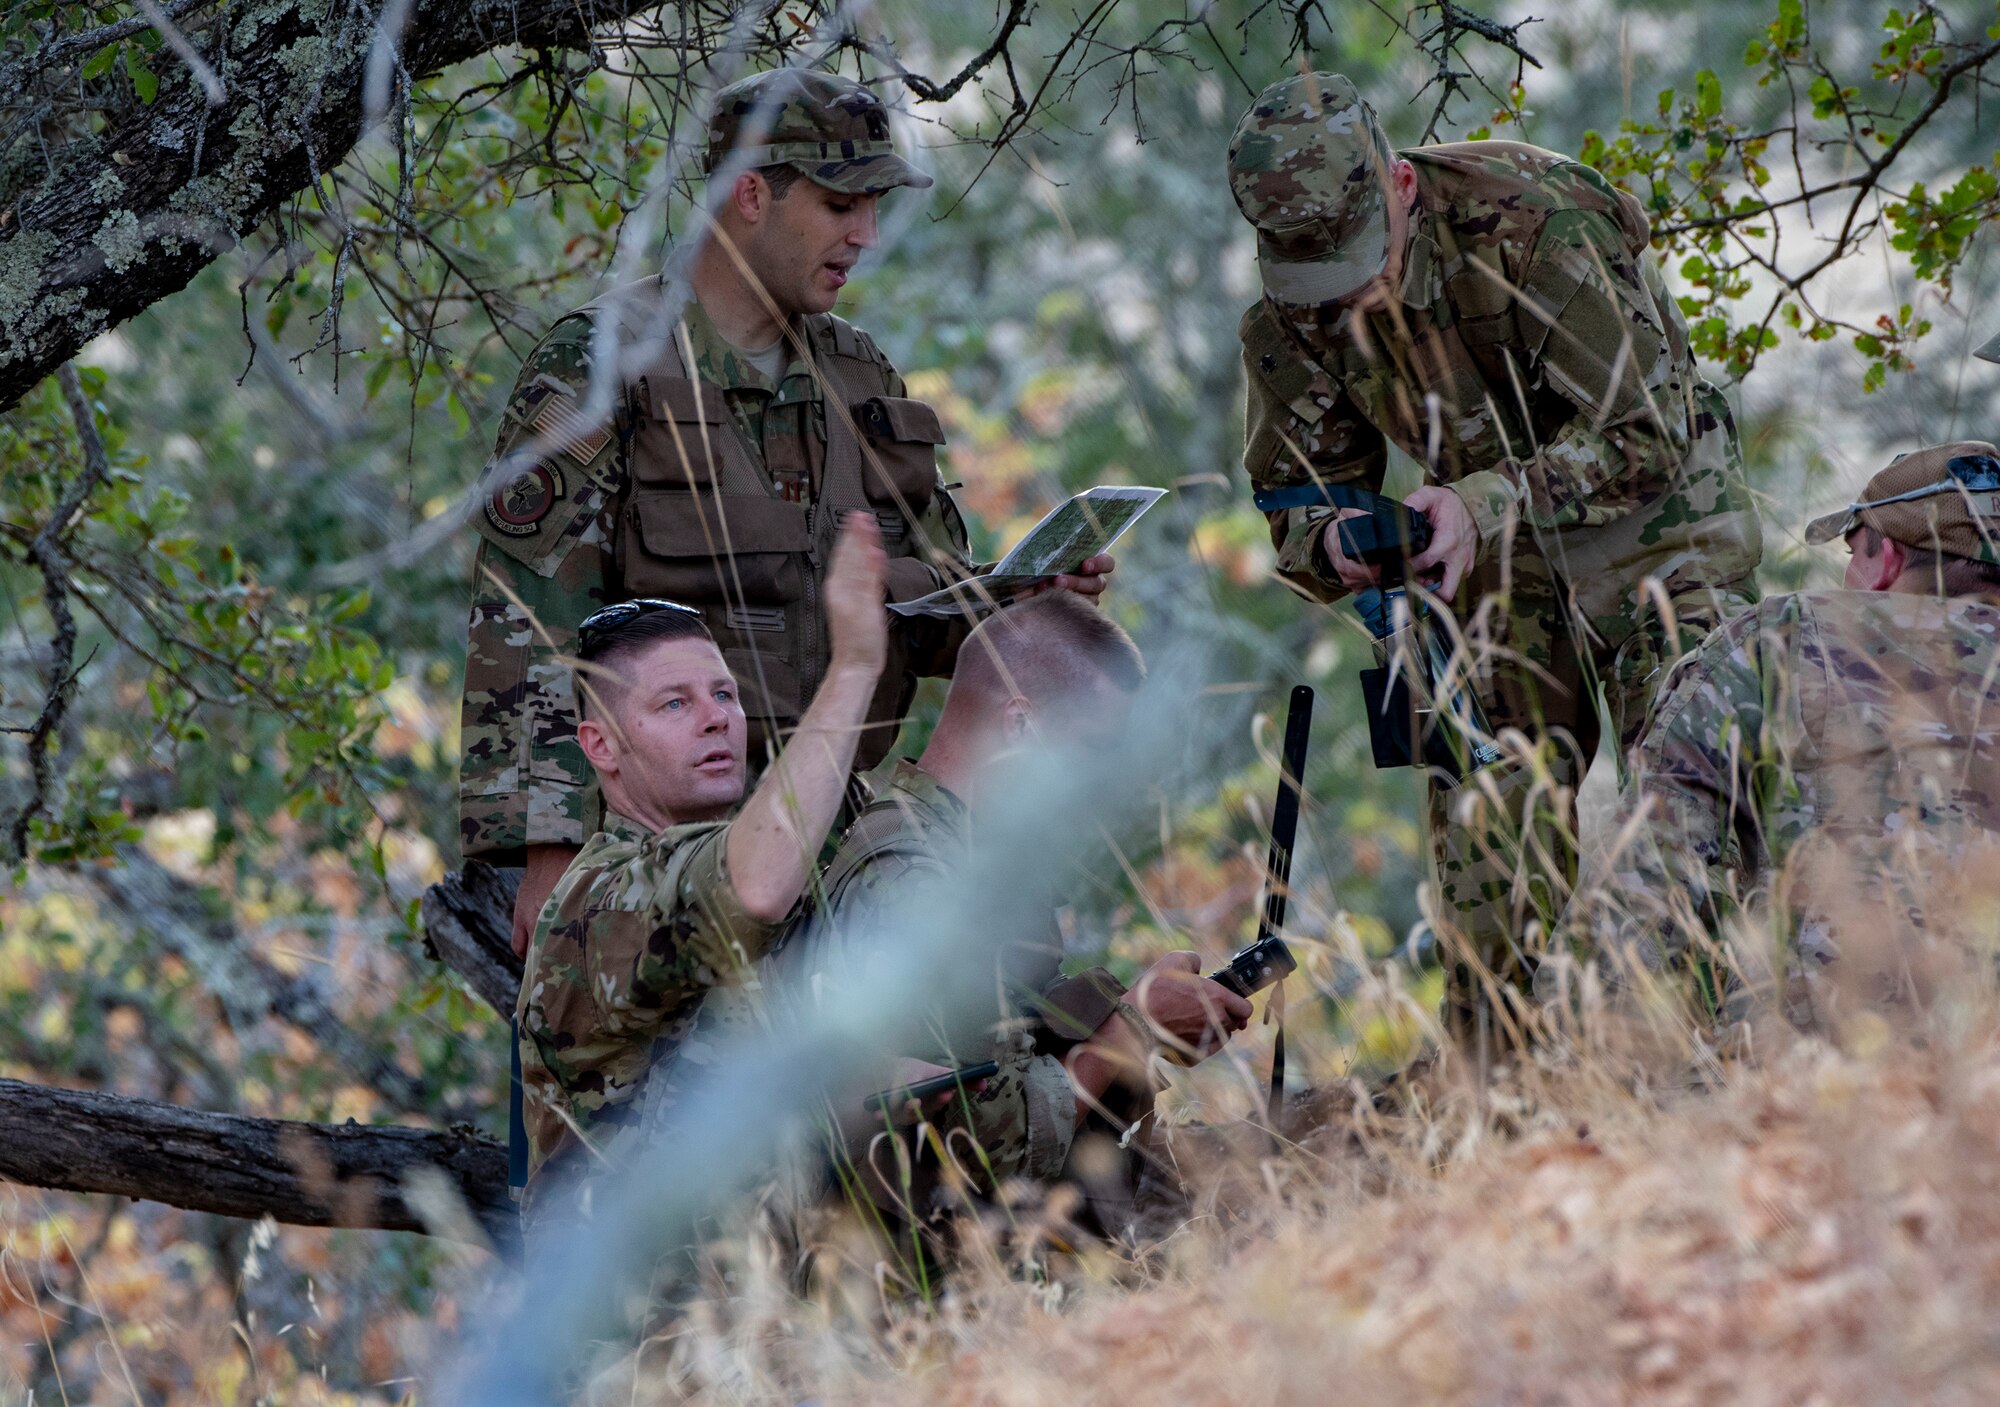 Aircrew members use communication devices and other supplies during a Survival, Evasion, Resistance and Escape training exercise that will last well into the evening, Aug. 5, 2019 in a remote area near Travis Air Force Base, California. SERE instructors conduct the training to improve aircrew’s skill sets and update them on new techniques, procedures and technologies. (U.S. Air Force photo by Heide Couch)